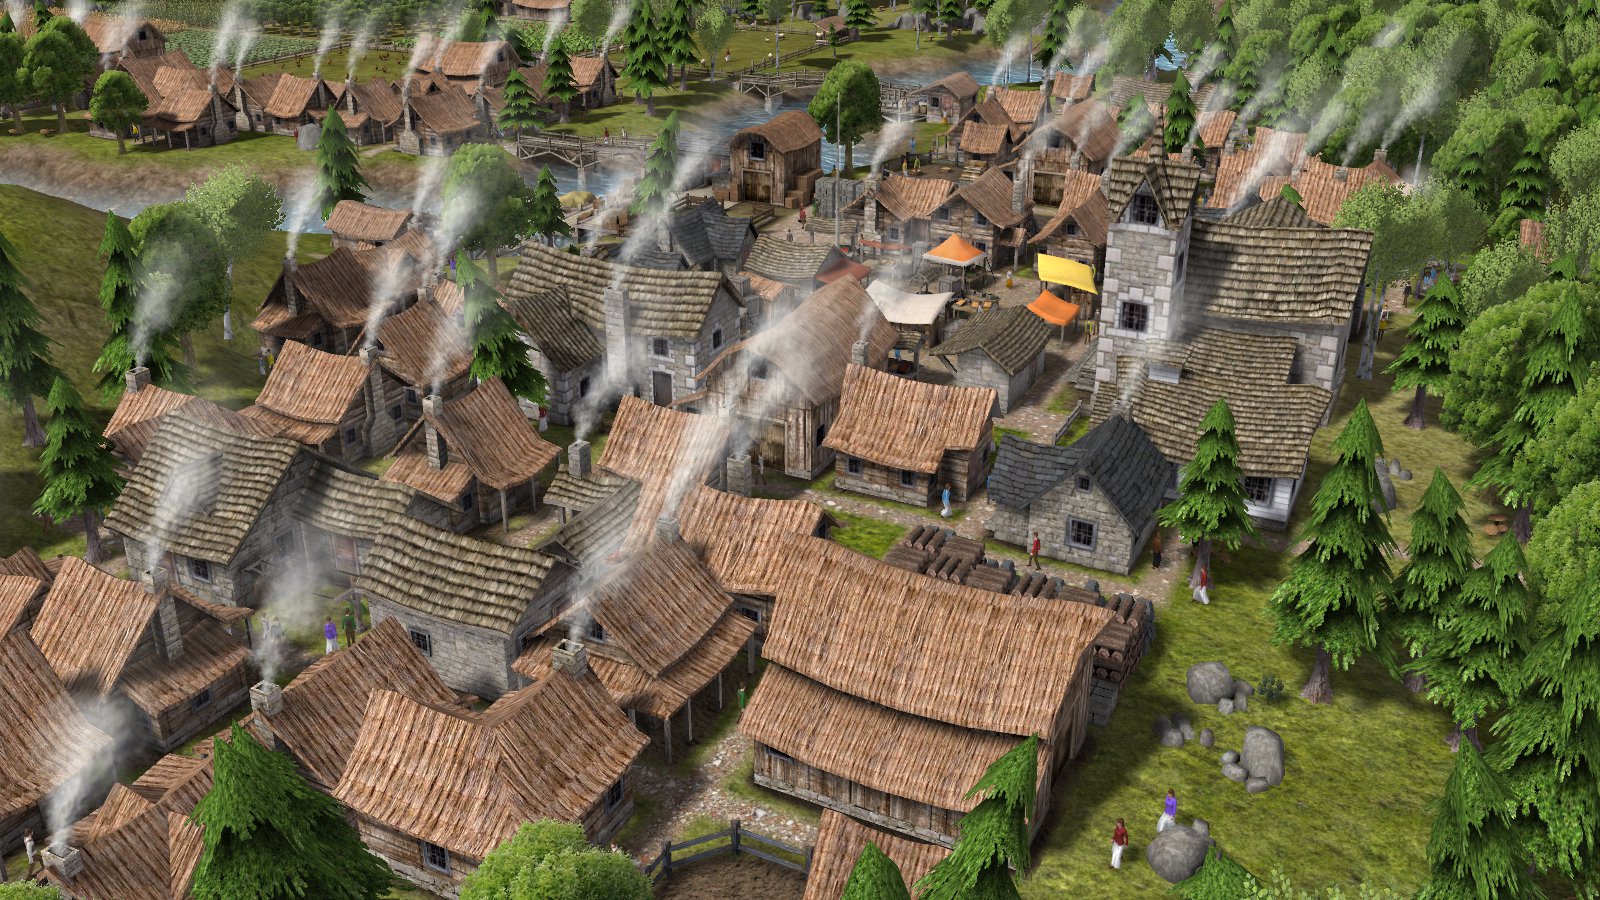 New gameplay video for "Banished" - a city building game with a focus